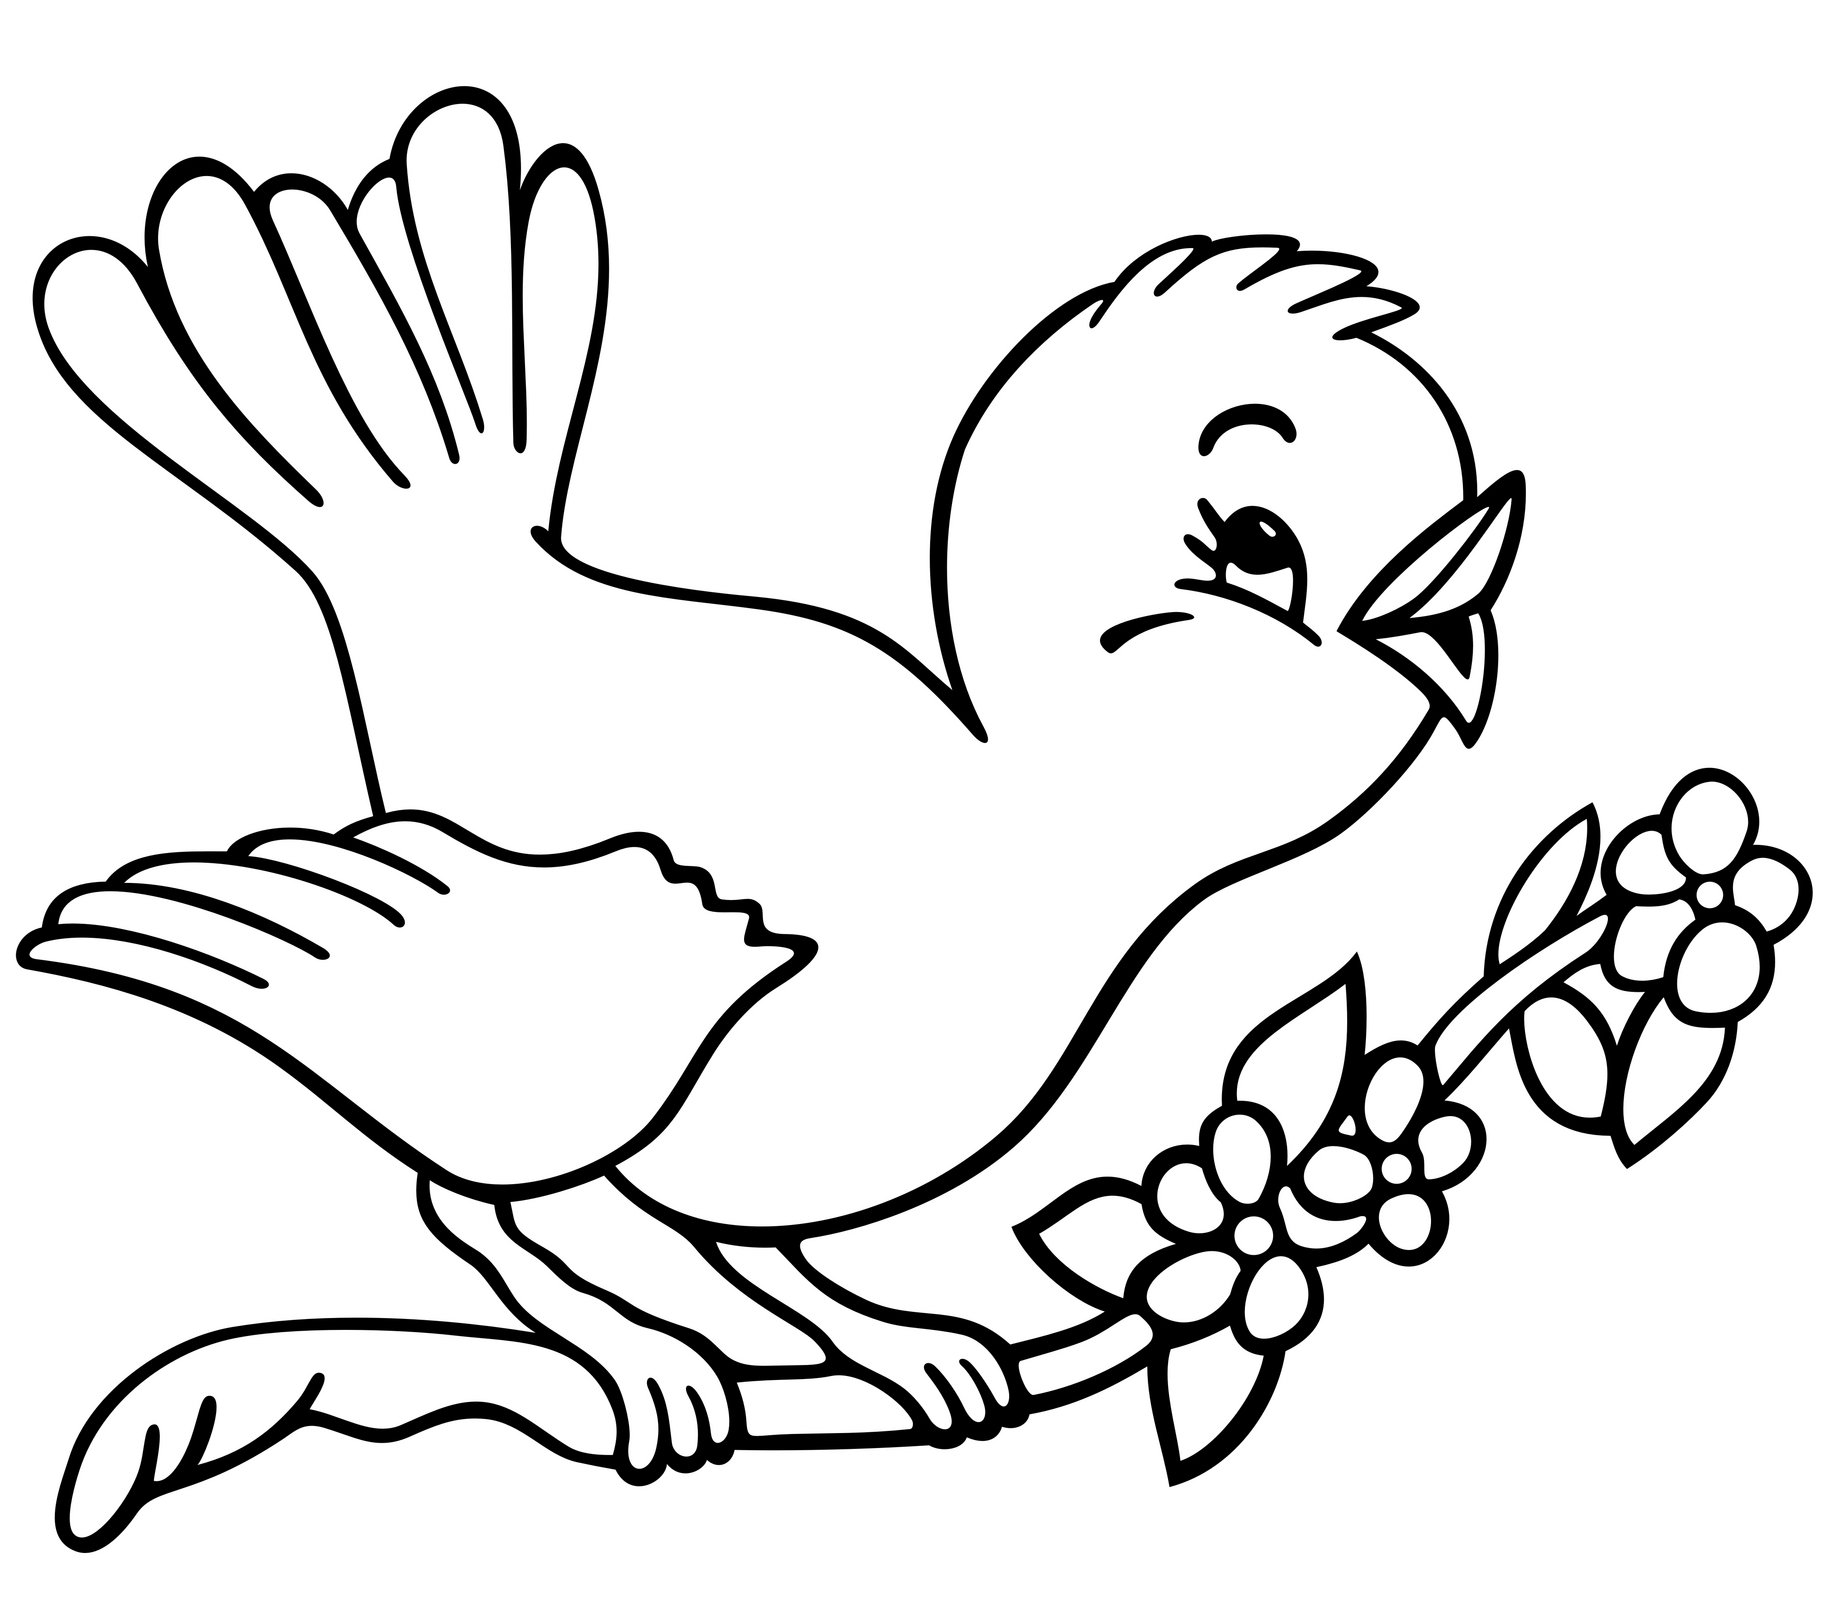 1000+ images about Coloring Pages | Disney, Coloring ...